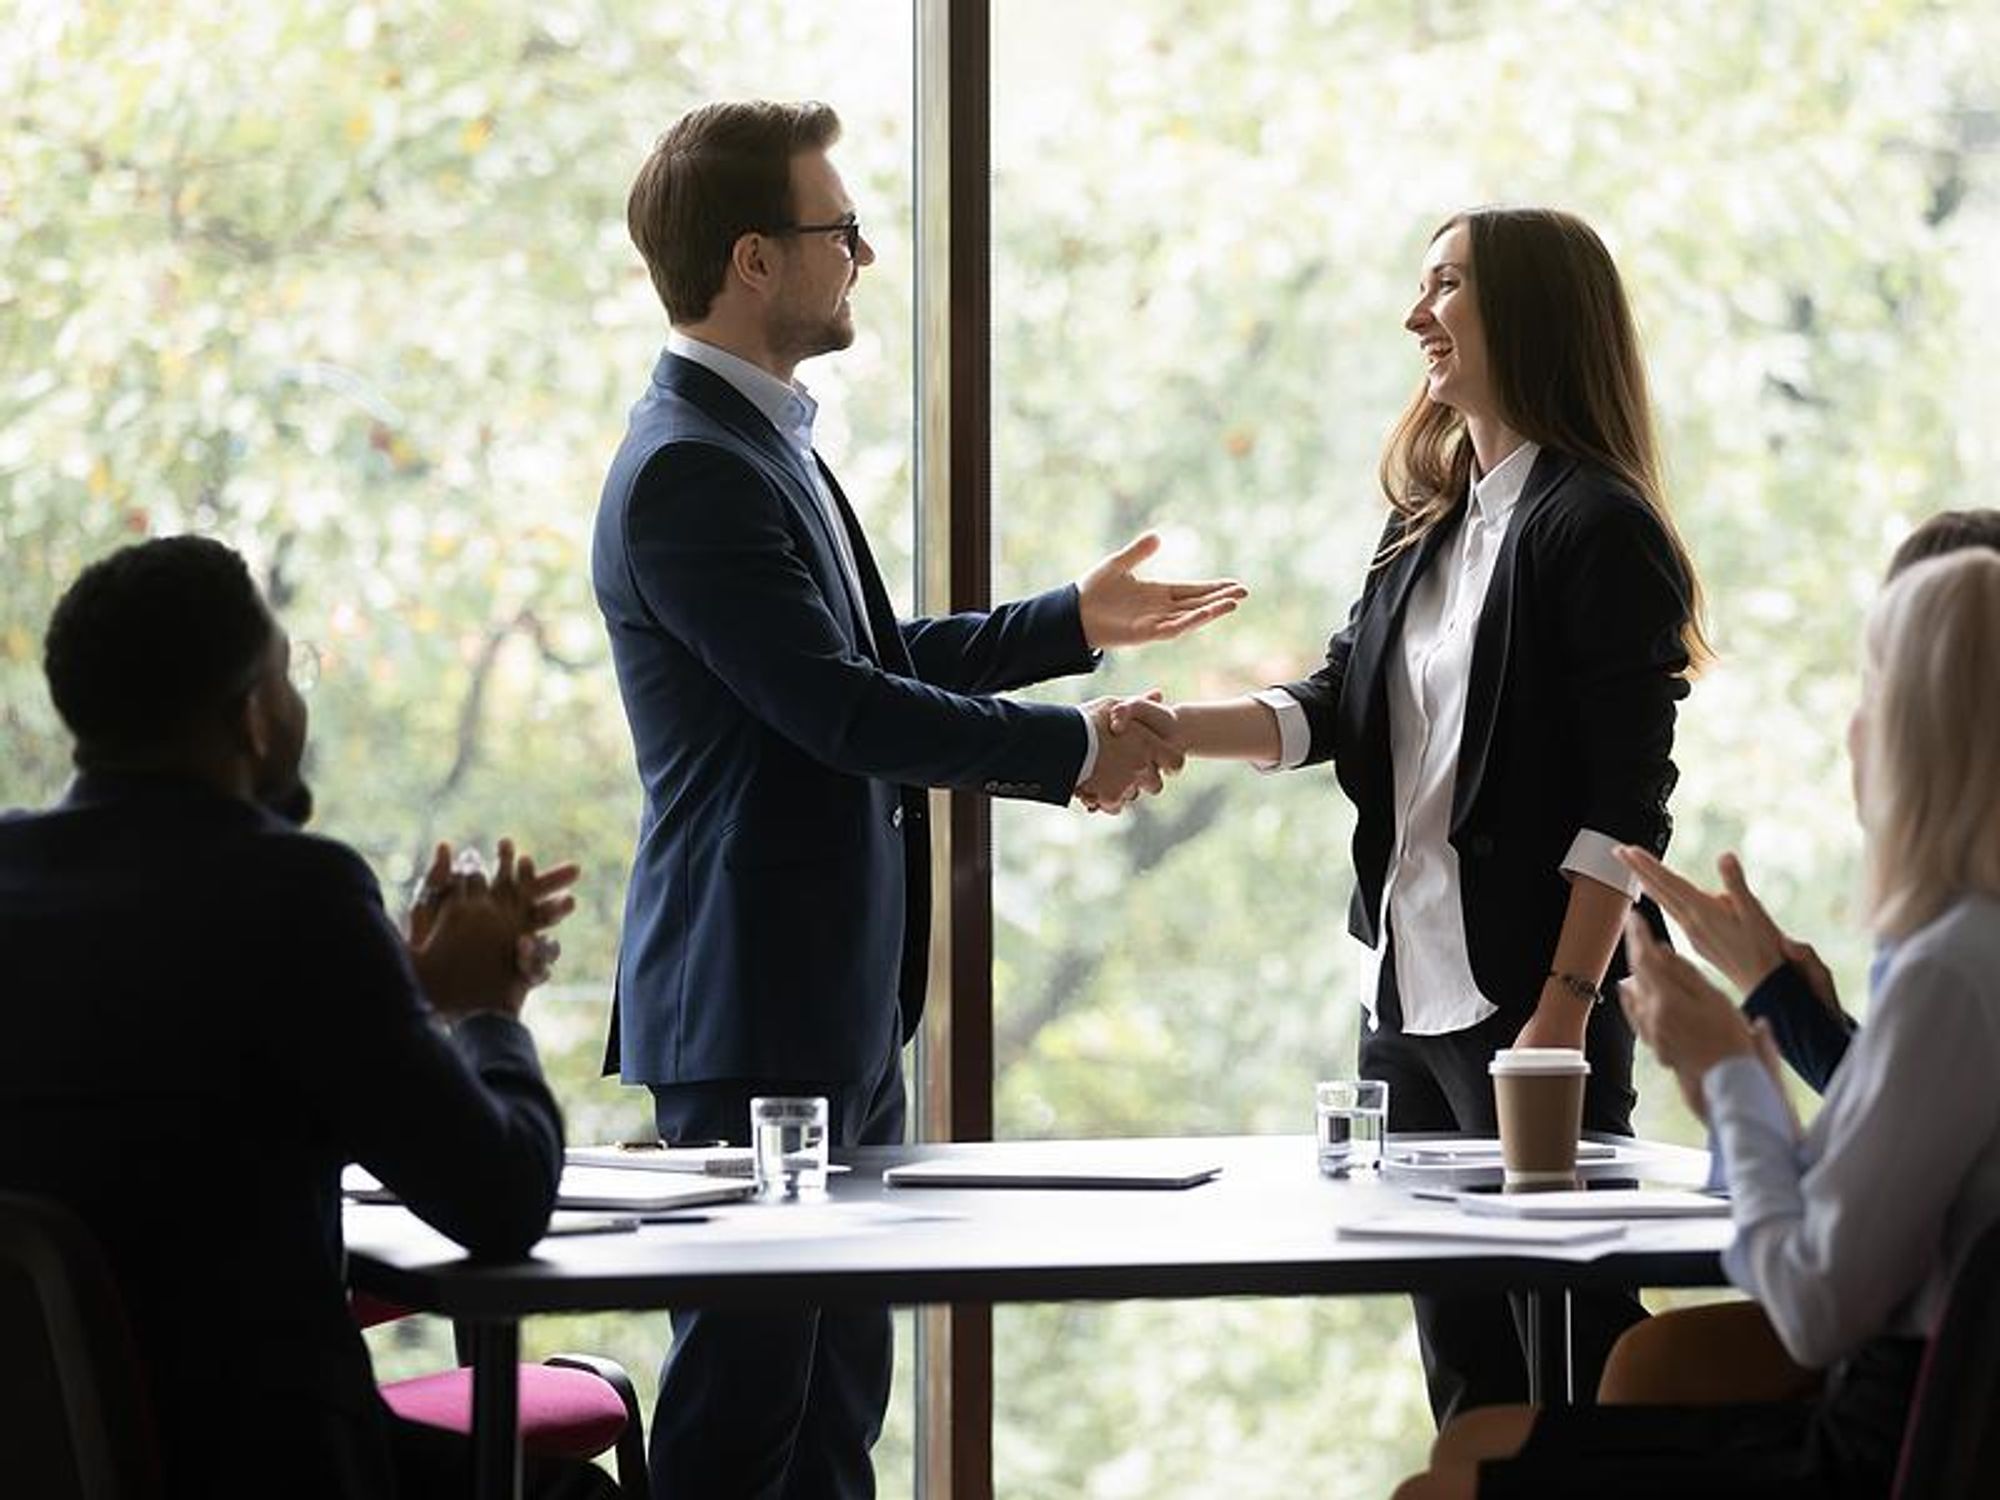 Woman gets a promotion at work and shakes hands with her new boss